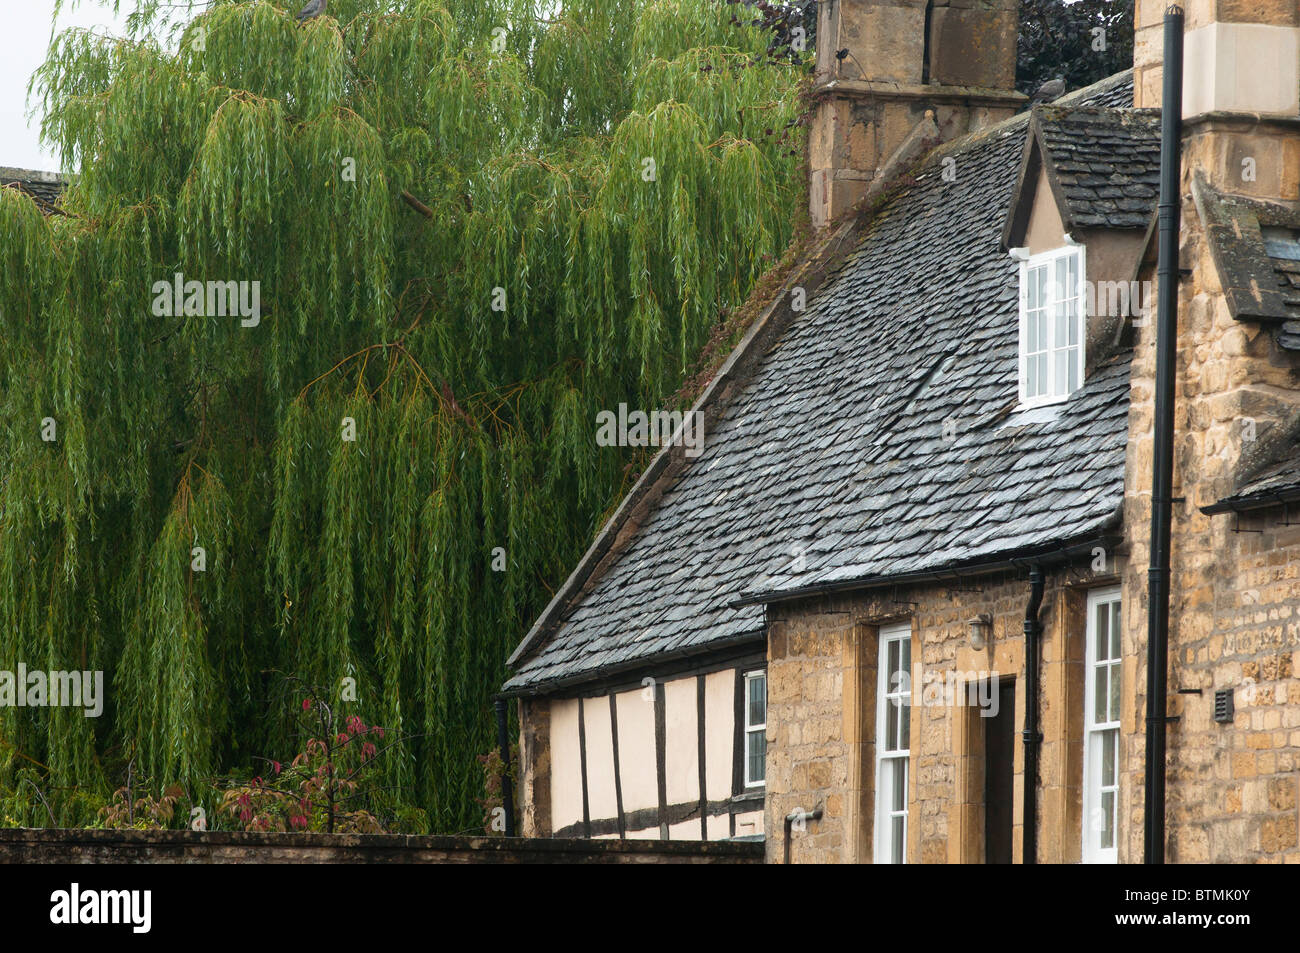 Character Cottages Next To A Weeping Willow In Chipping Camden In